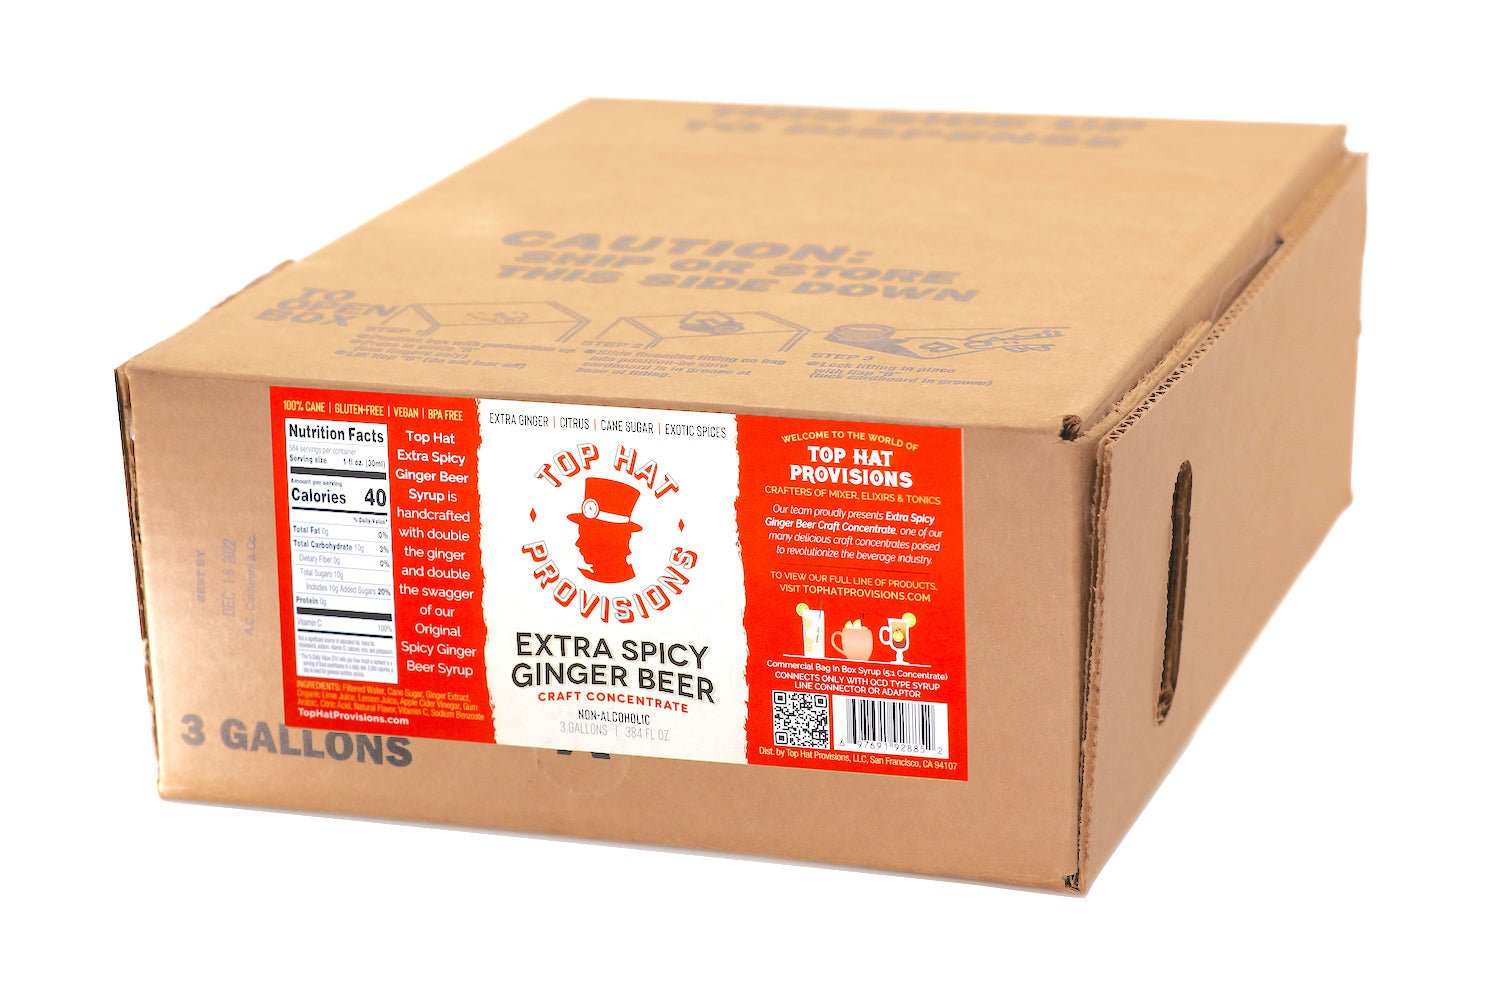 Top Hat Extra Spicy Ginger Beer Syrup BIB - 3 gallon Soda System Bag in Box for Soda Fountain Systems - Makes 18 gallons of Ginger Beer - Groove Rabbit